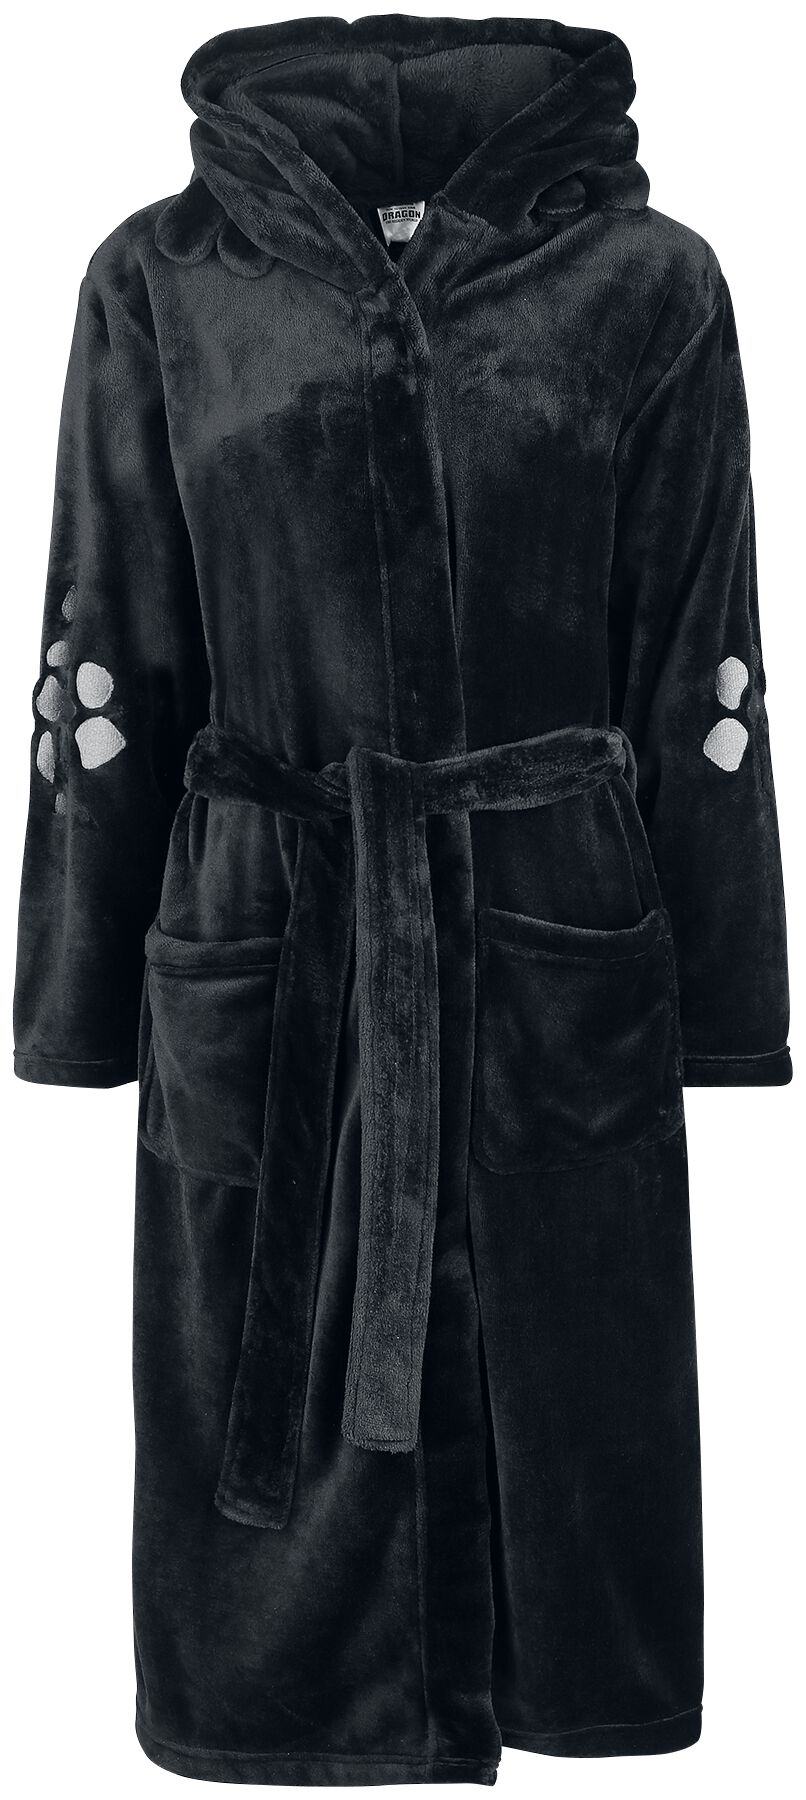 How to Train Your Dragon Toothless - Cosplay Bathrobe black